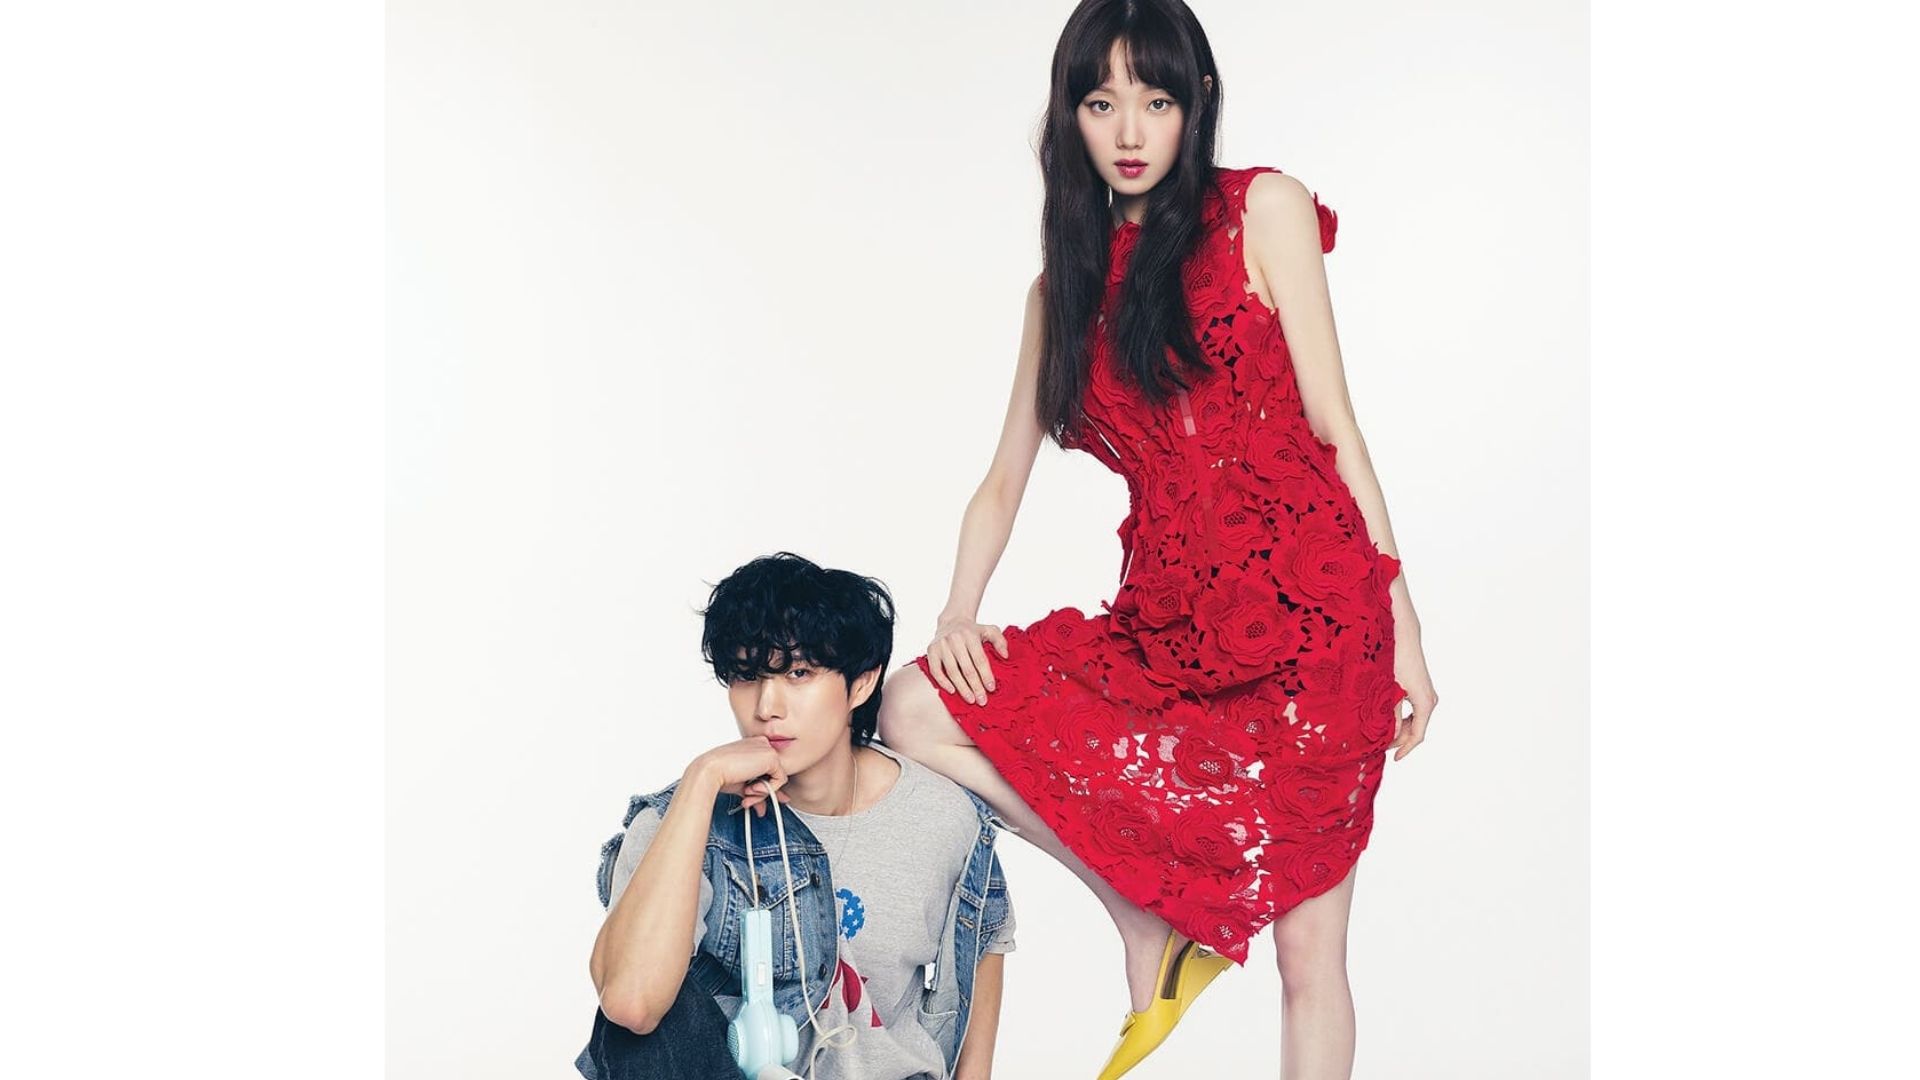 “Sh**ting Stars” – Lee Sung Kyung and Kim Young Dae Share Their Working Experience